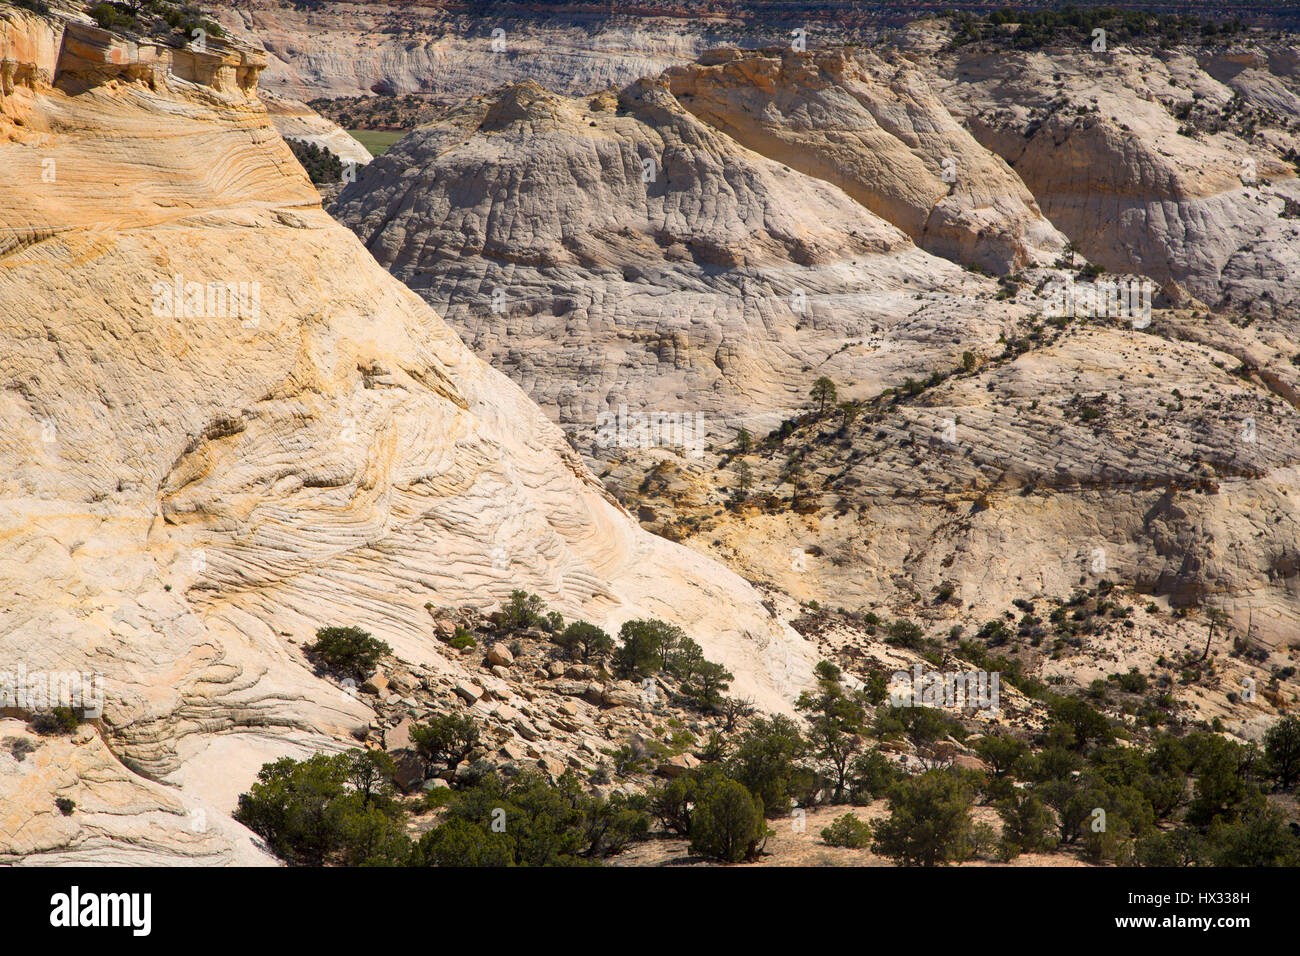 Calf Creek Canyon, Highway 12 National Scenic Byway, Grand Staircase - Escalante National Monument, Utah Stock Photo